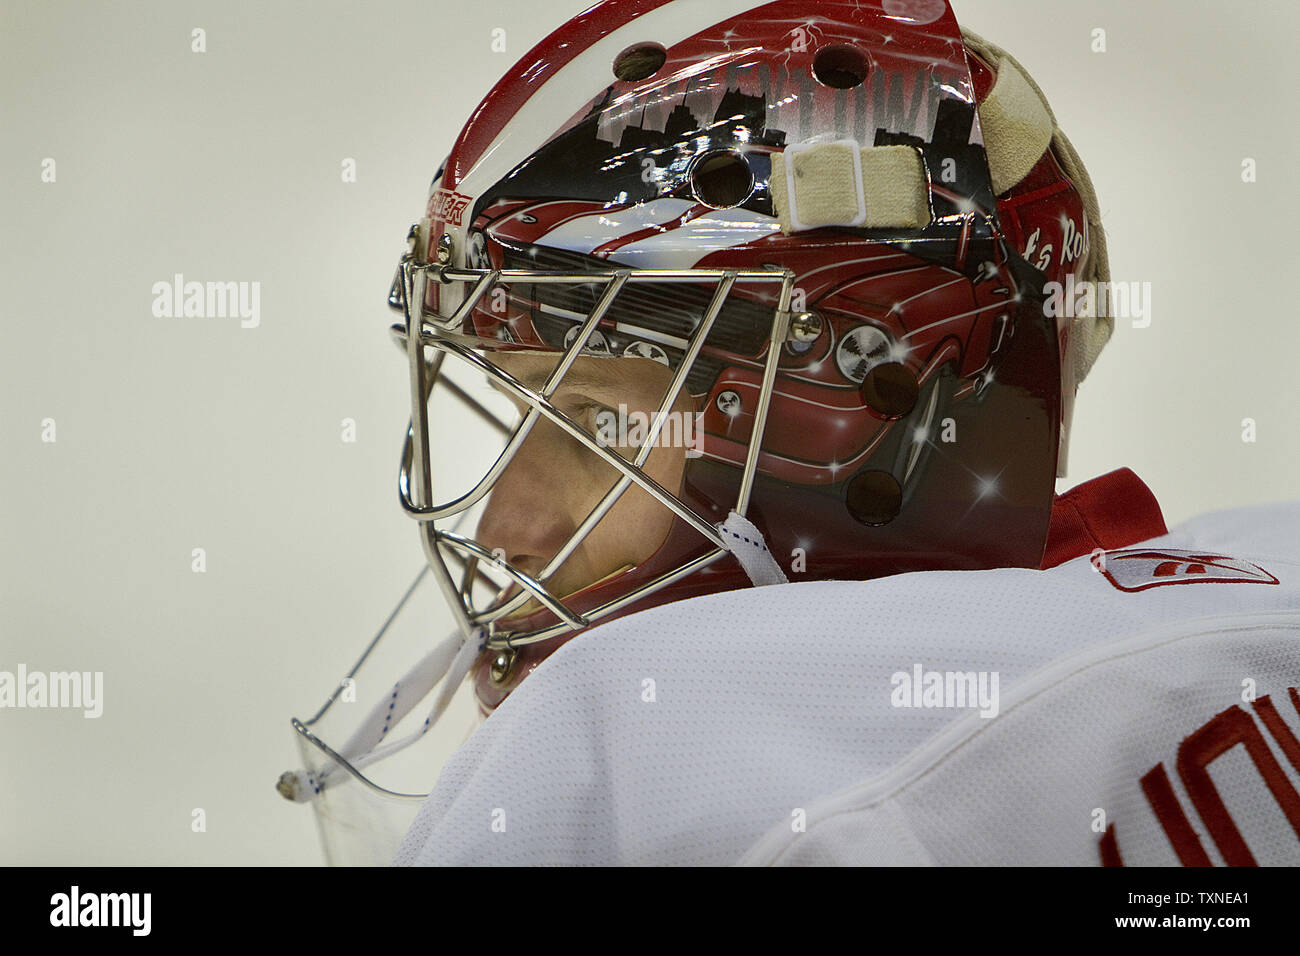 Detroit Red Wings goalie Jimmy Howard watches the Colorado Avalanche during warm ups at the Pepsi Center in Denver on December 27, 2010.  UPI/Gary C. Caskey Stock Photo